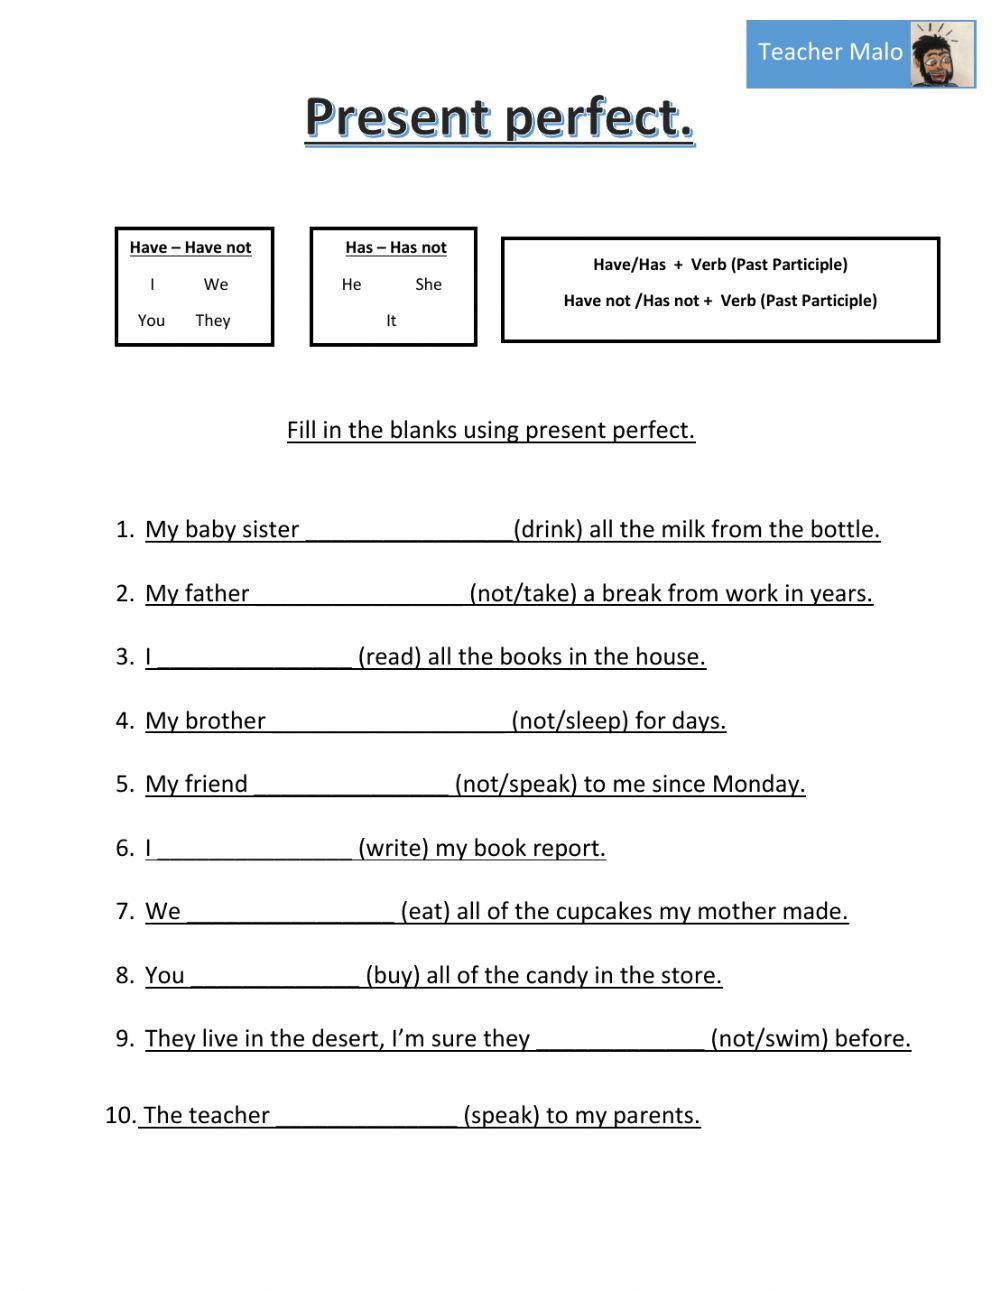 Present Perfect online exercise for 6 | Live Worksheets